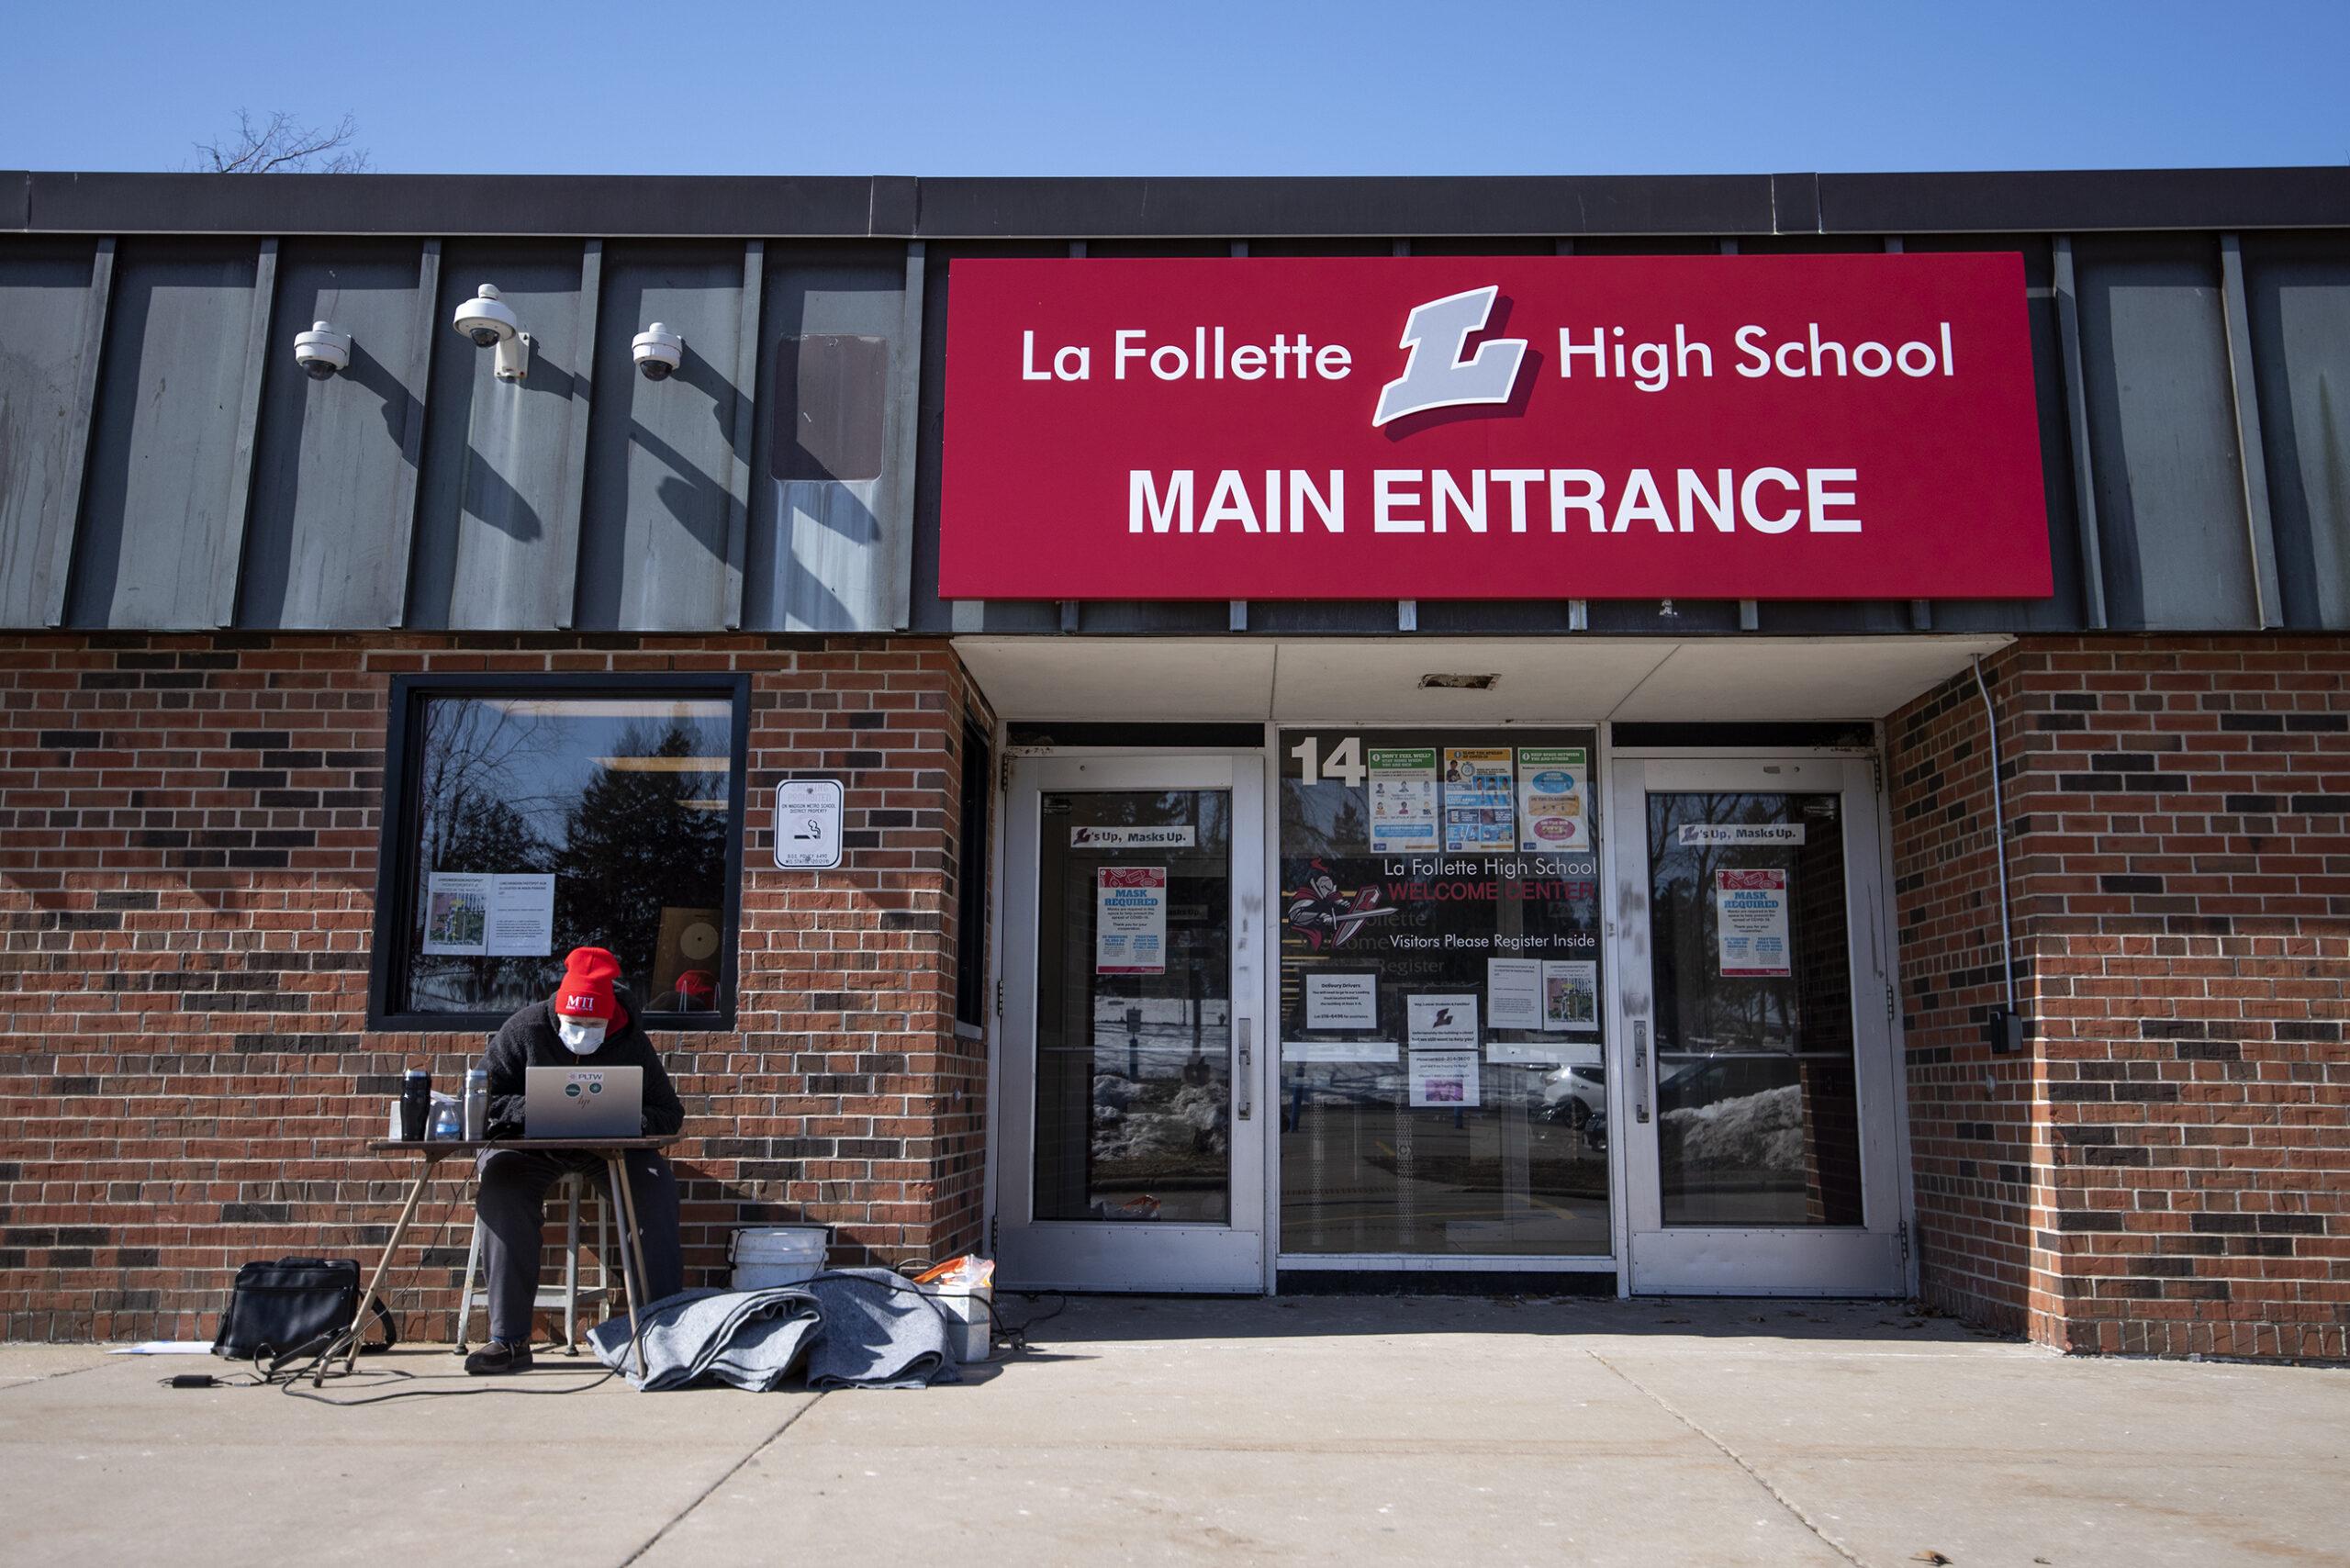 A red sign indicating the main entrance of La Follette High School is seen next to a teacher giving a lesson virtually outside.